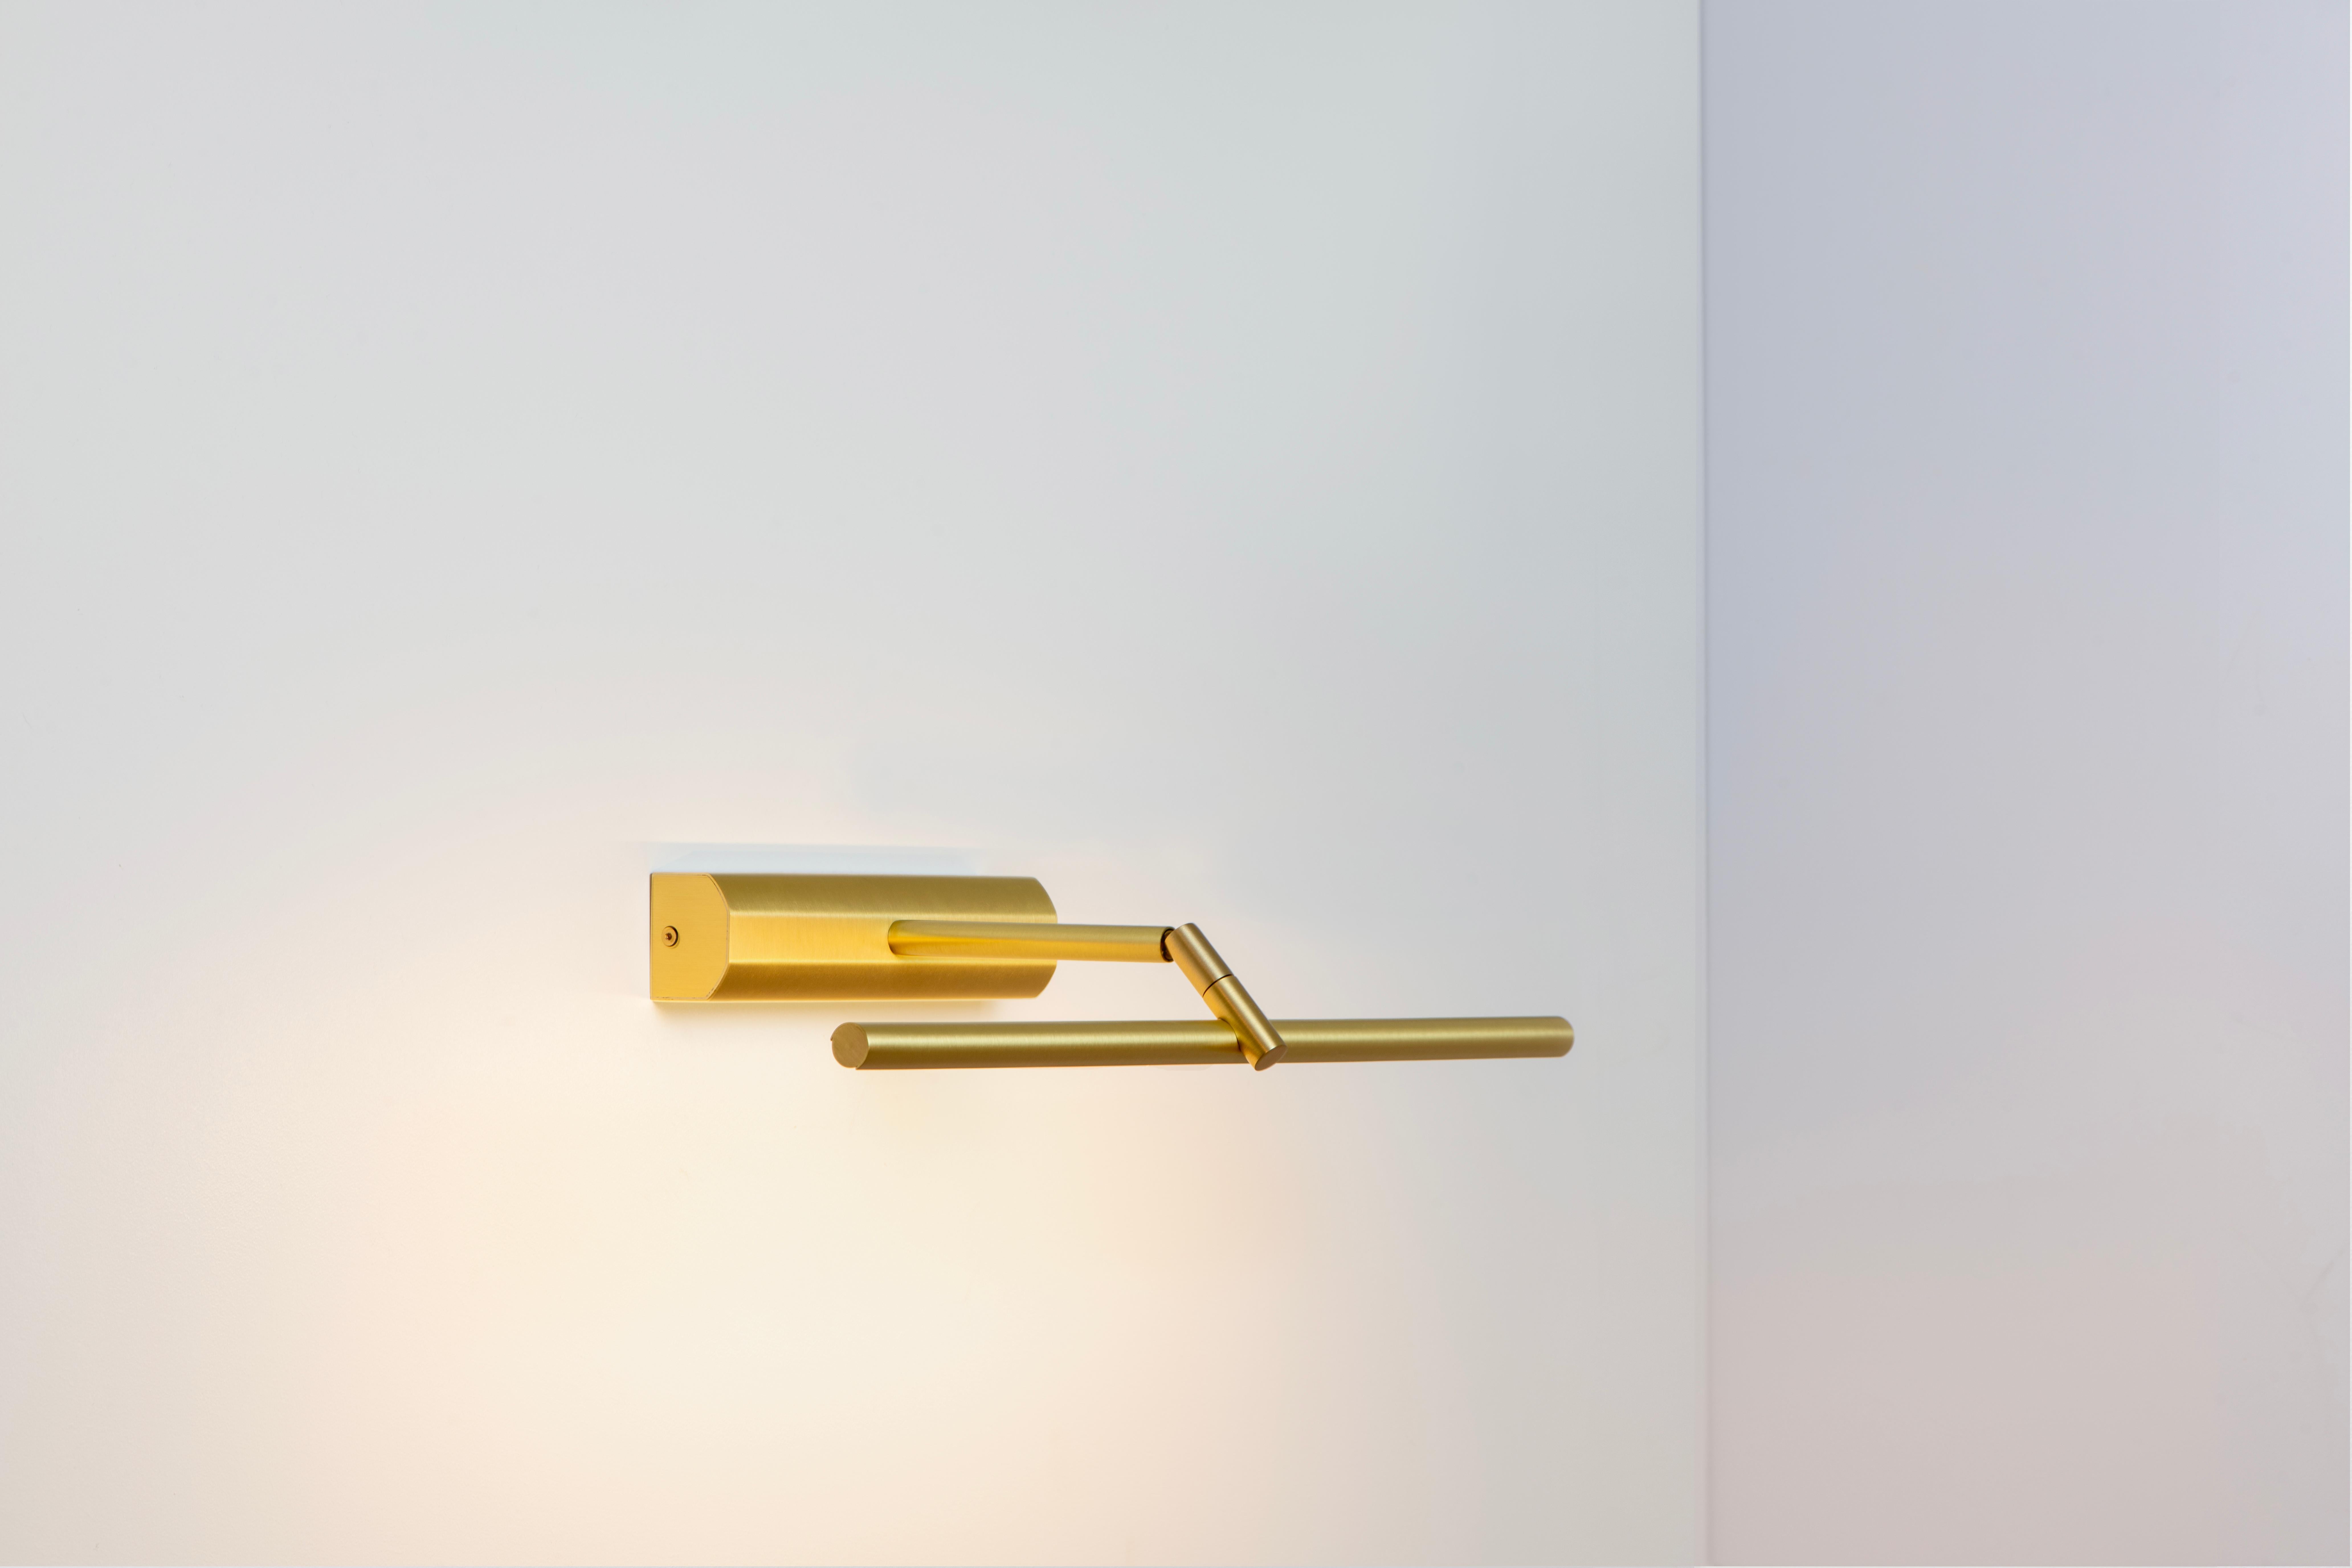 Airy L Wall Light by Emilie Cathelineau
Dimensions: D 20 x W 61.4 X H 4.4 cm
Materials: Solid brass.


Discover luminous elegance redefined with the Airy picture wall light from CVL Luminaires, a creation signed by the talented designer Emilie